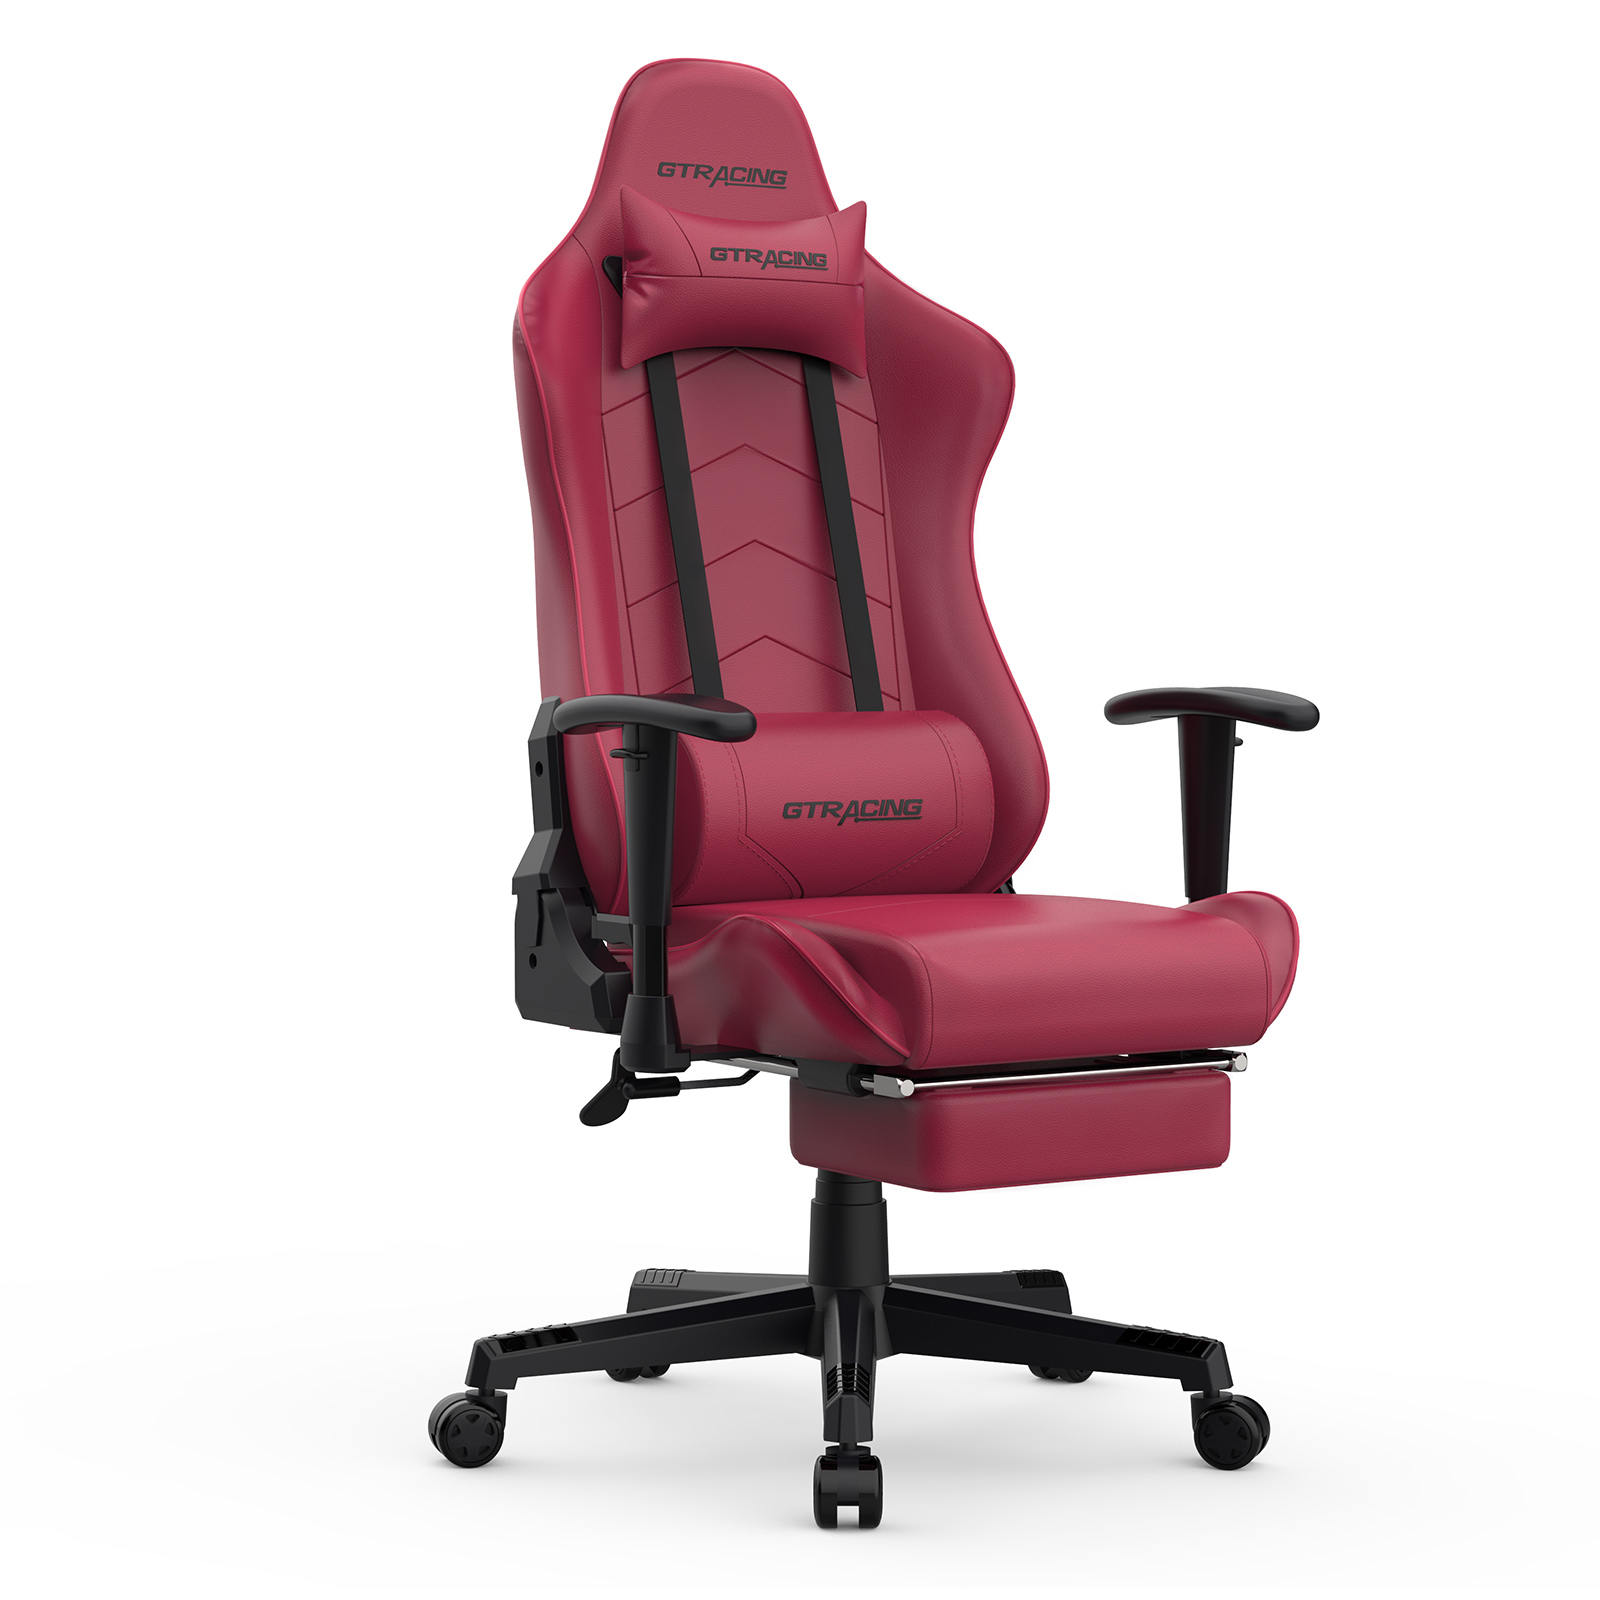 GTRACING Gaming Chair with Footrest Ergonomic Reclining Leather Chair, Dark Red - image 1 of 6